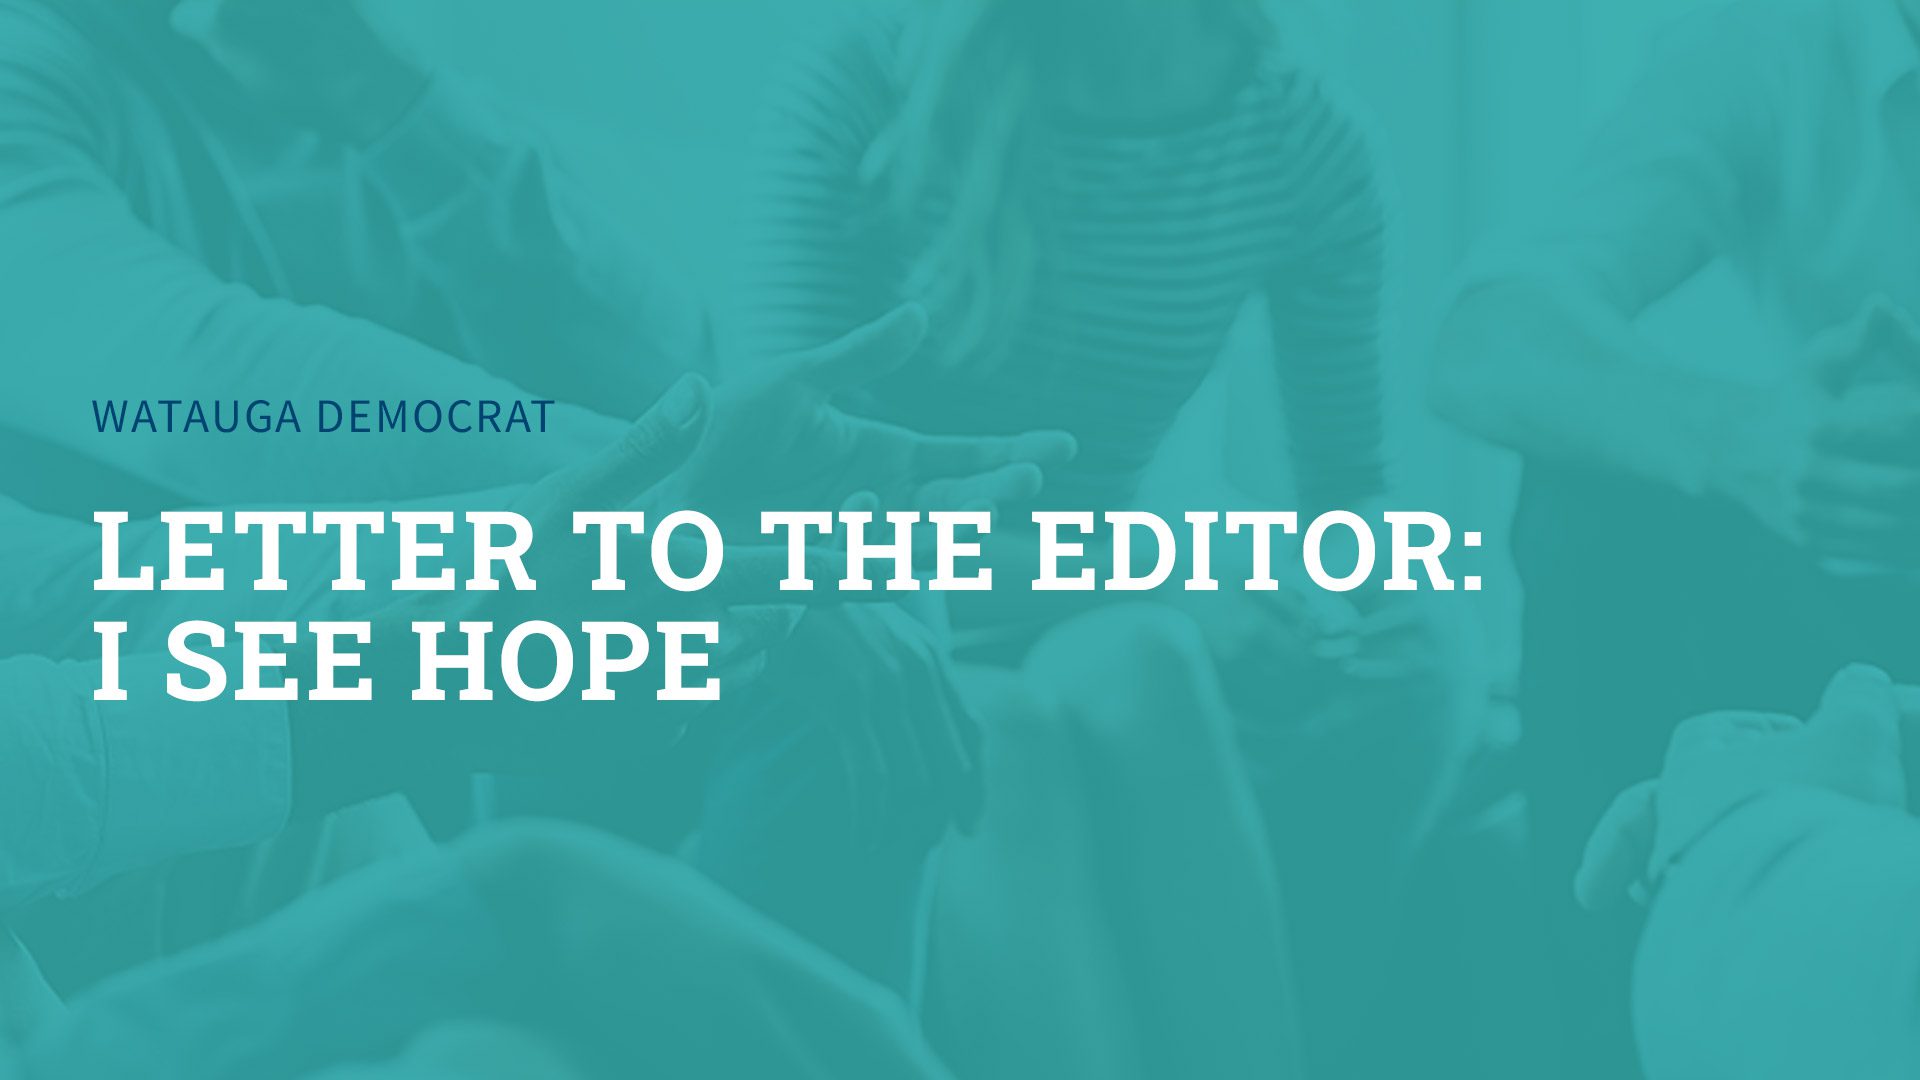 Letter to the editor: I see hope